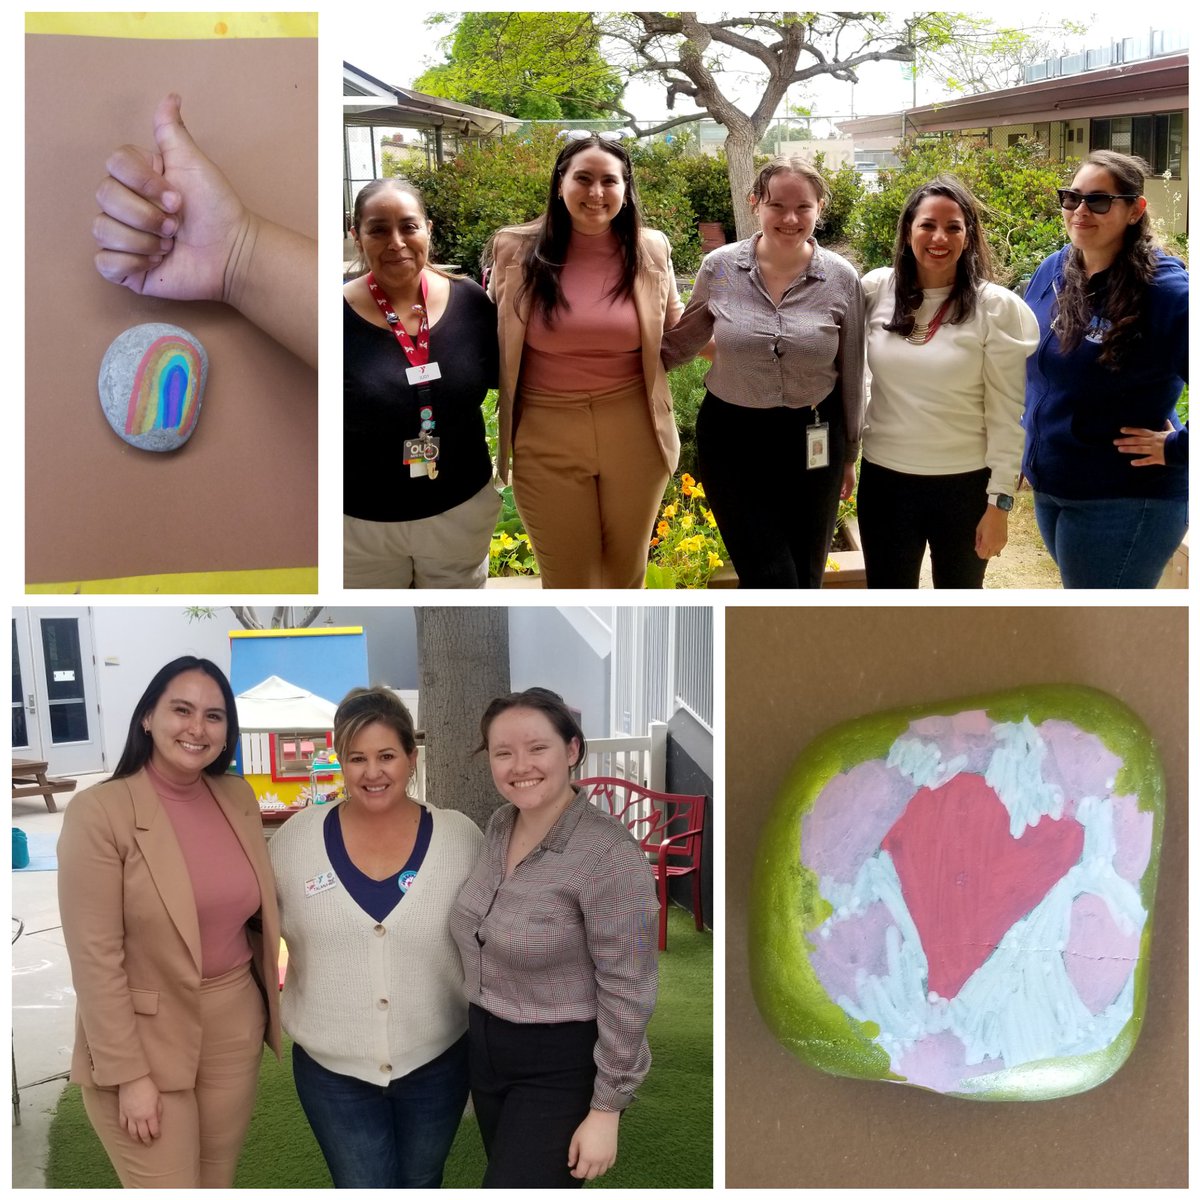 Big smiles today hosting staff from @SenToniAtkins & @AsmChrisWard.  Visited #childcare & #expandedlearning programs. 
✔ The programs work for families.
 ✔ They need more support. 💵
✔💜 The kiddos & @YMCASanDiego teams are amazing. #CareCantWait #AfterSchoolWorks